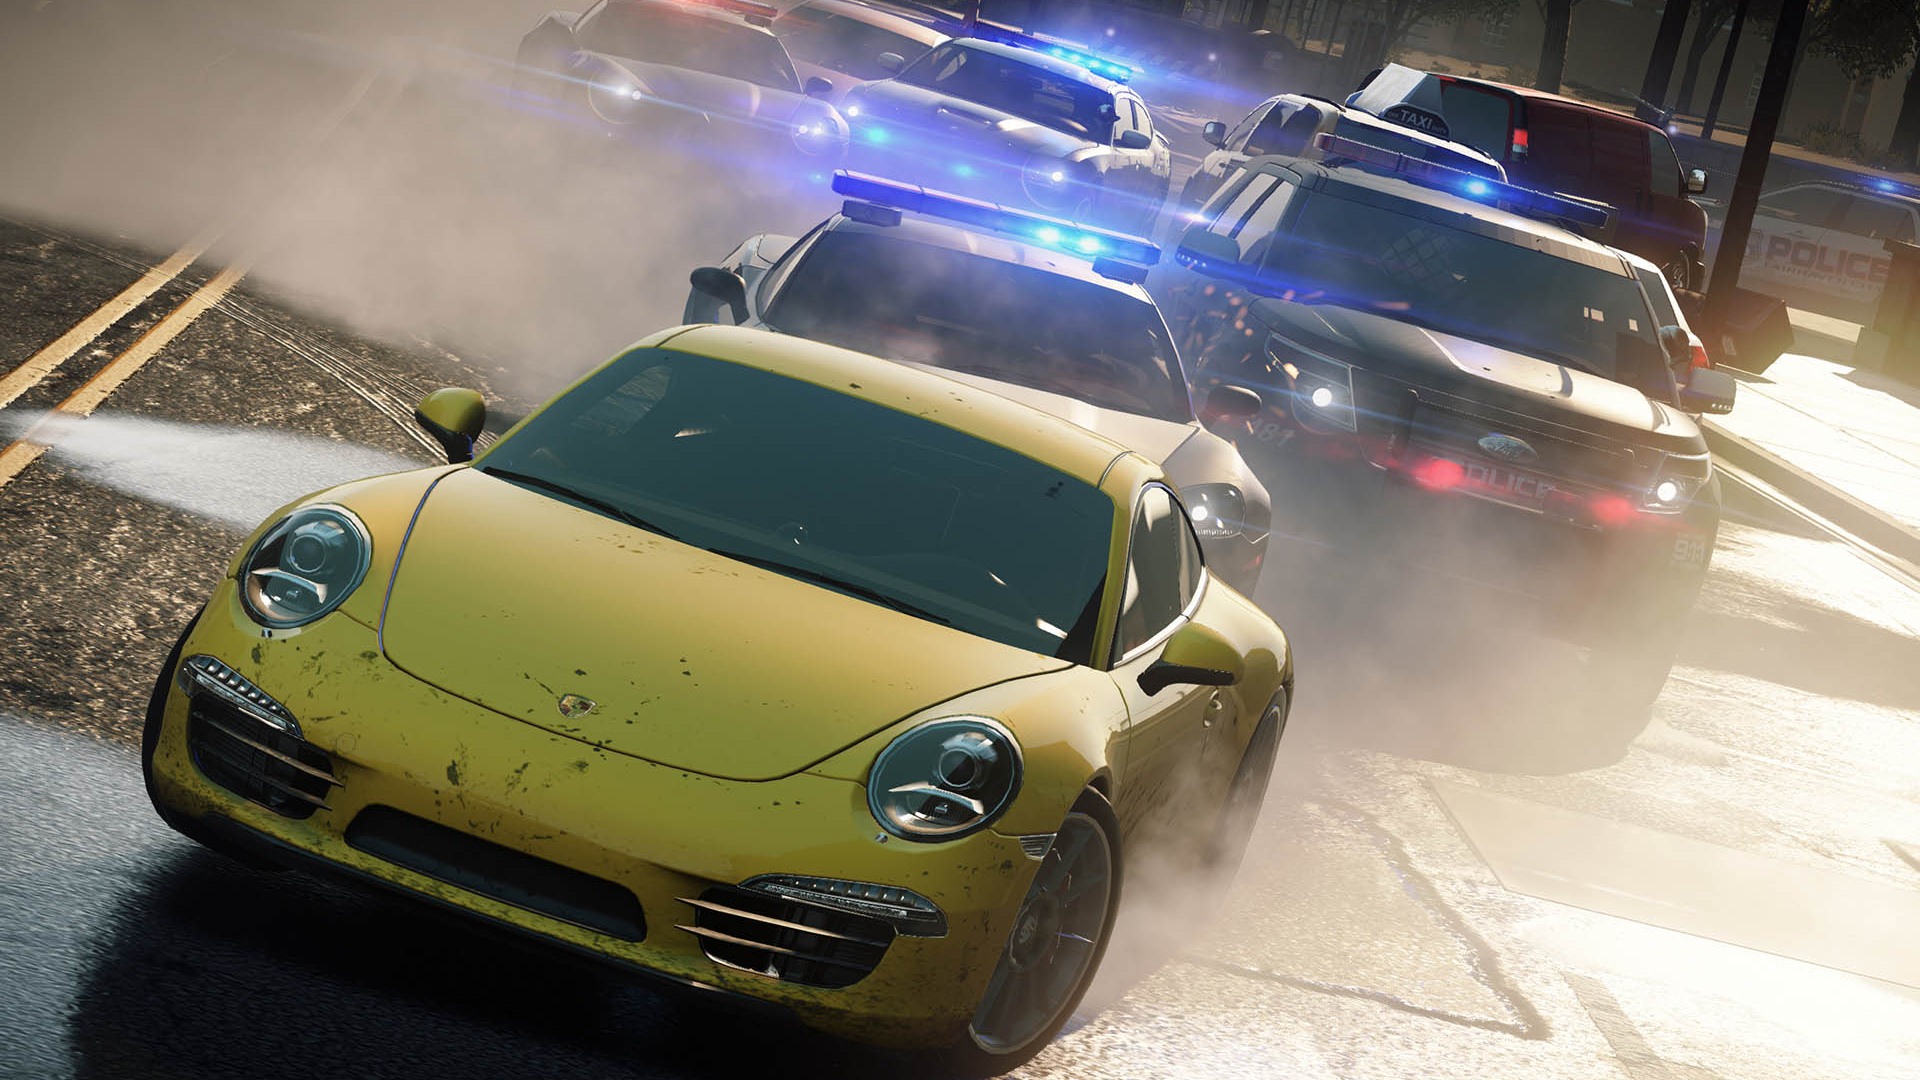 Need for Speed: Most Wanted 极品飞车17：最高通缉 高清壁纸15 - 1920x1080